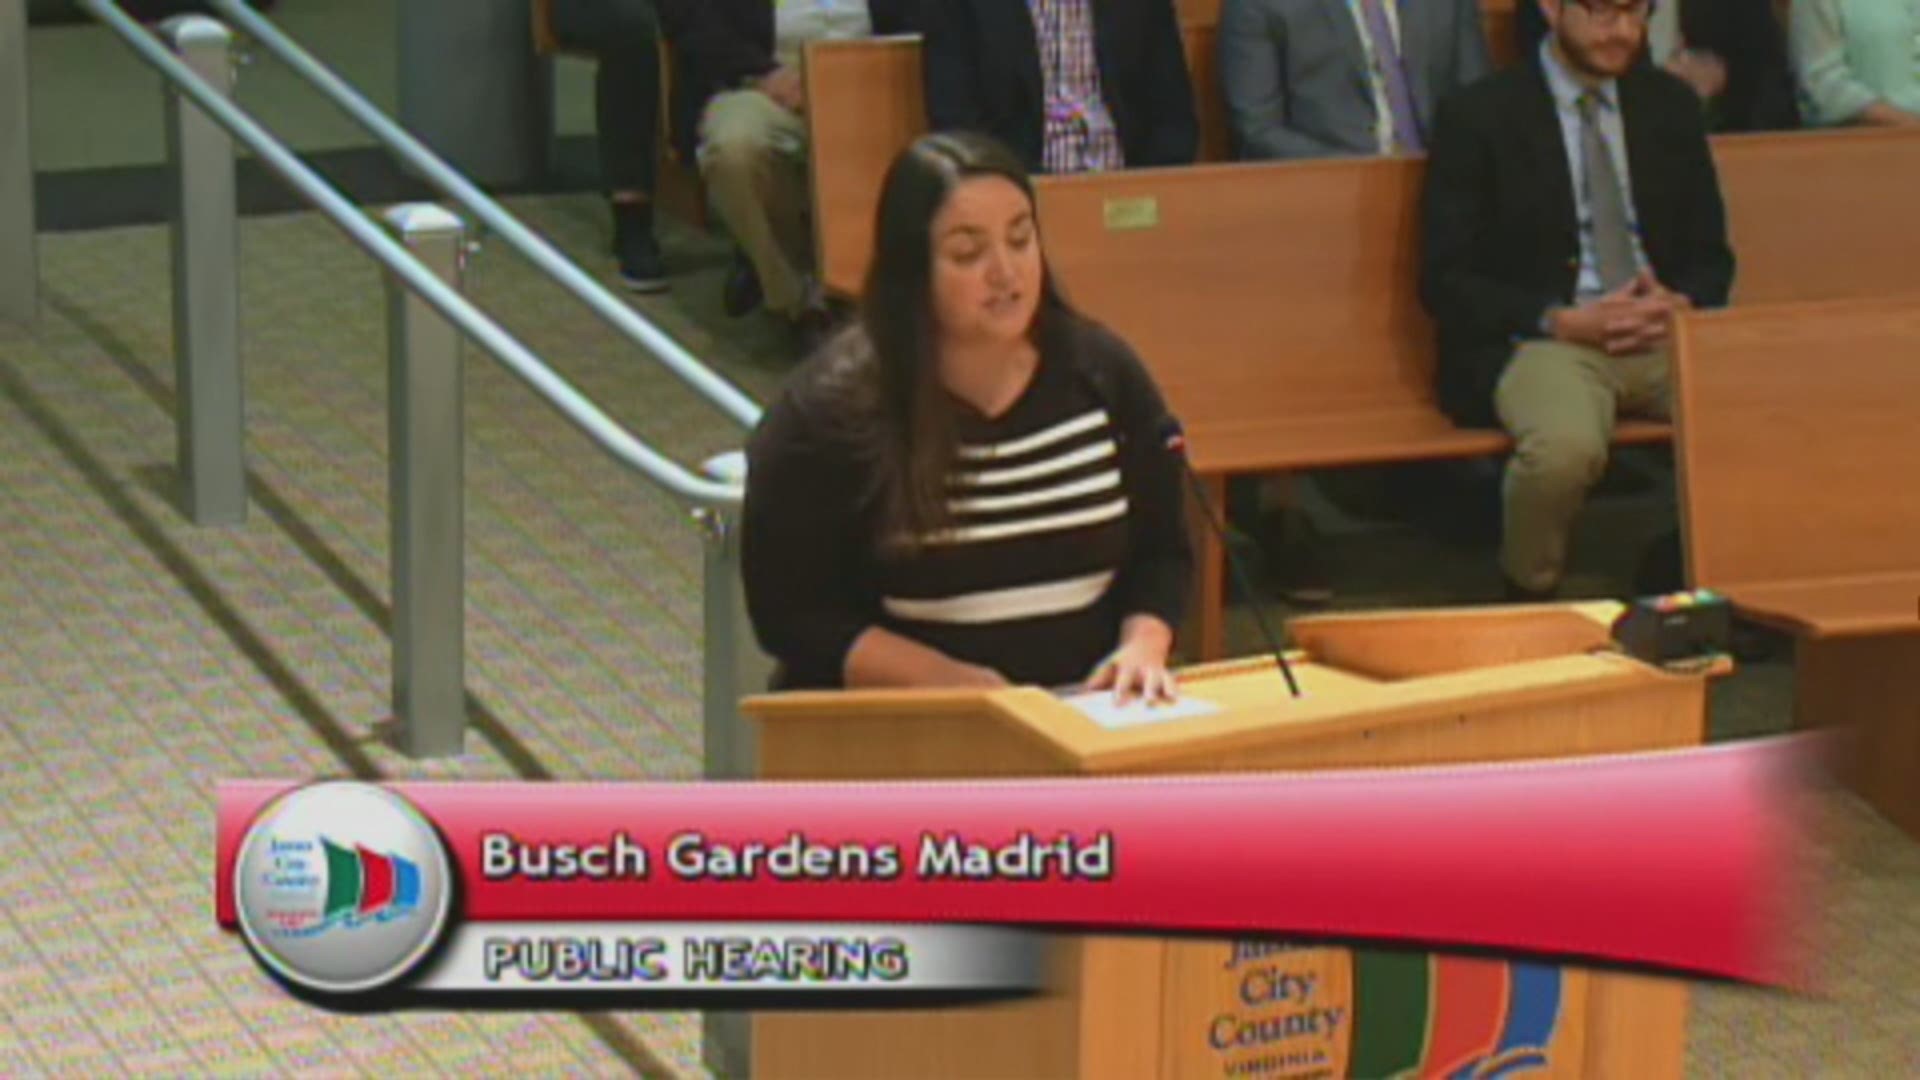 8/8/17: James City County Board of Supervisors meeting on Busch Gardens' height waiver request. Video courtesy JCC